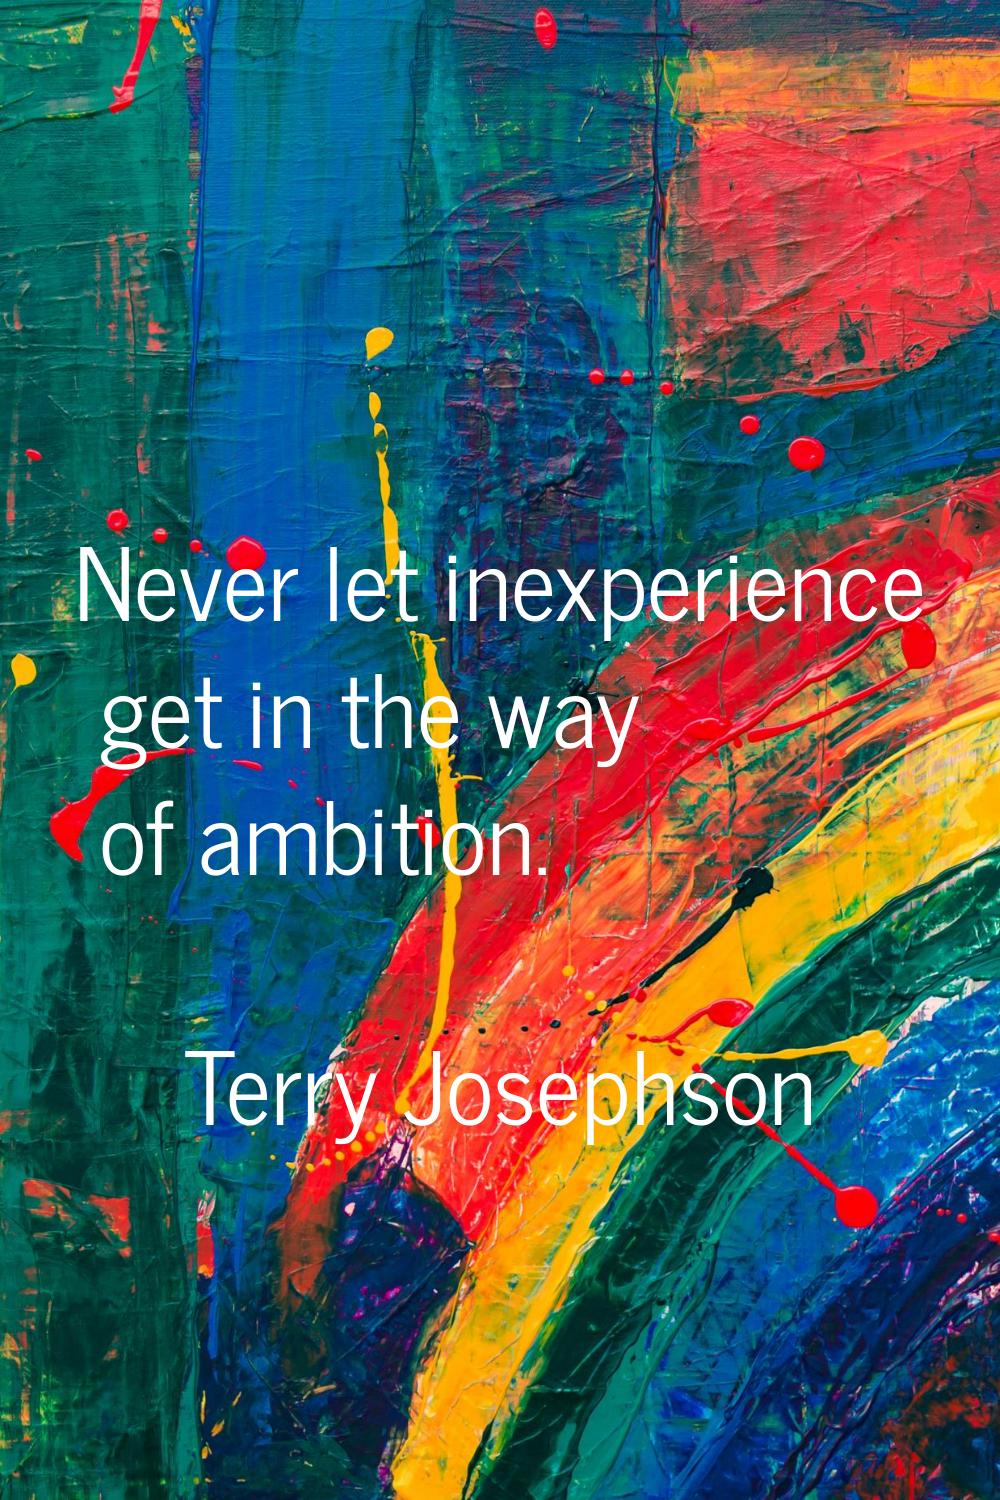 Never let inexperience get in the way of ambition.